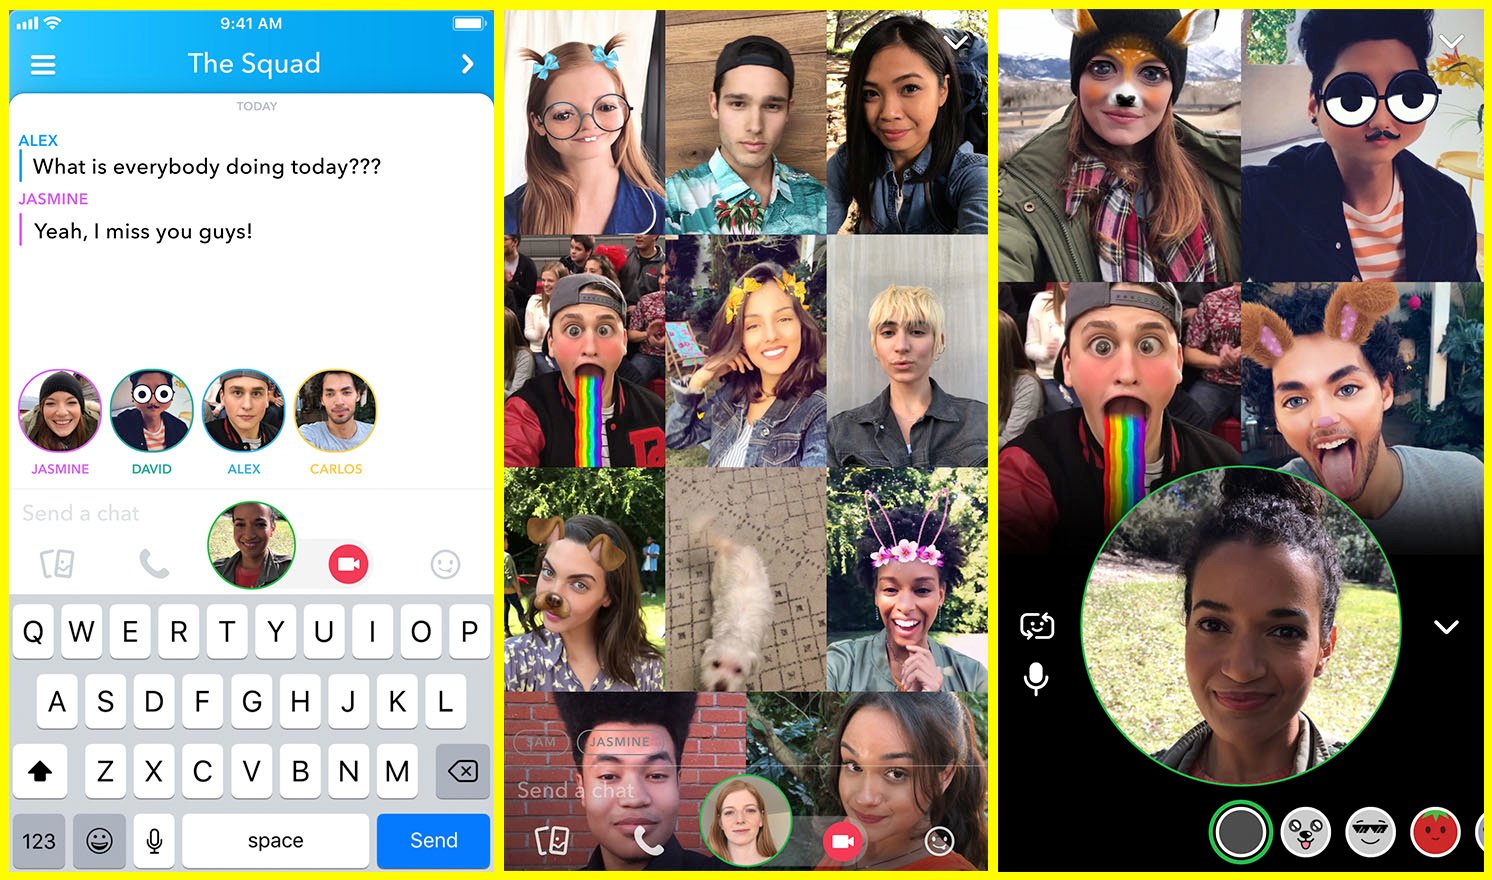 Here is a look at the new Snapchat video chat with up to 16 people and support for Snapchat Lenses.